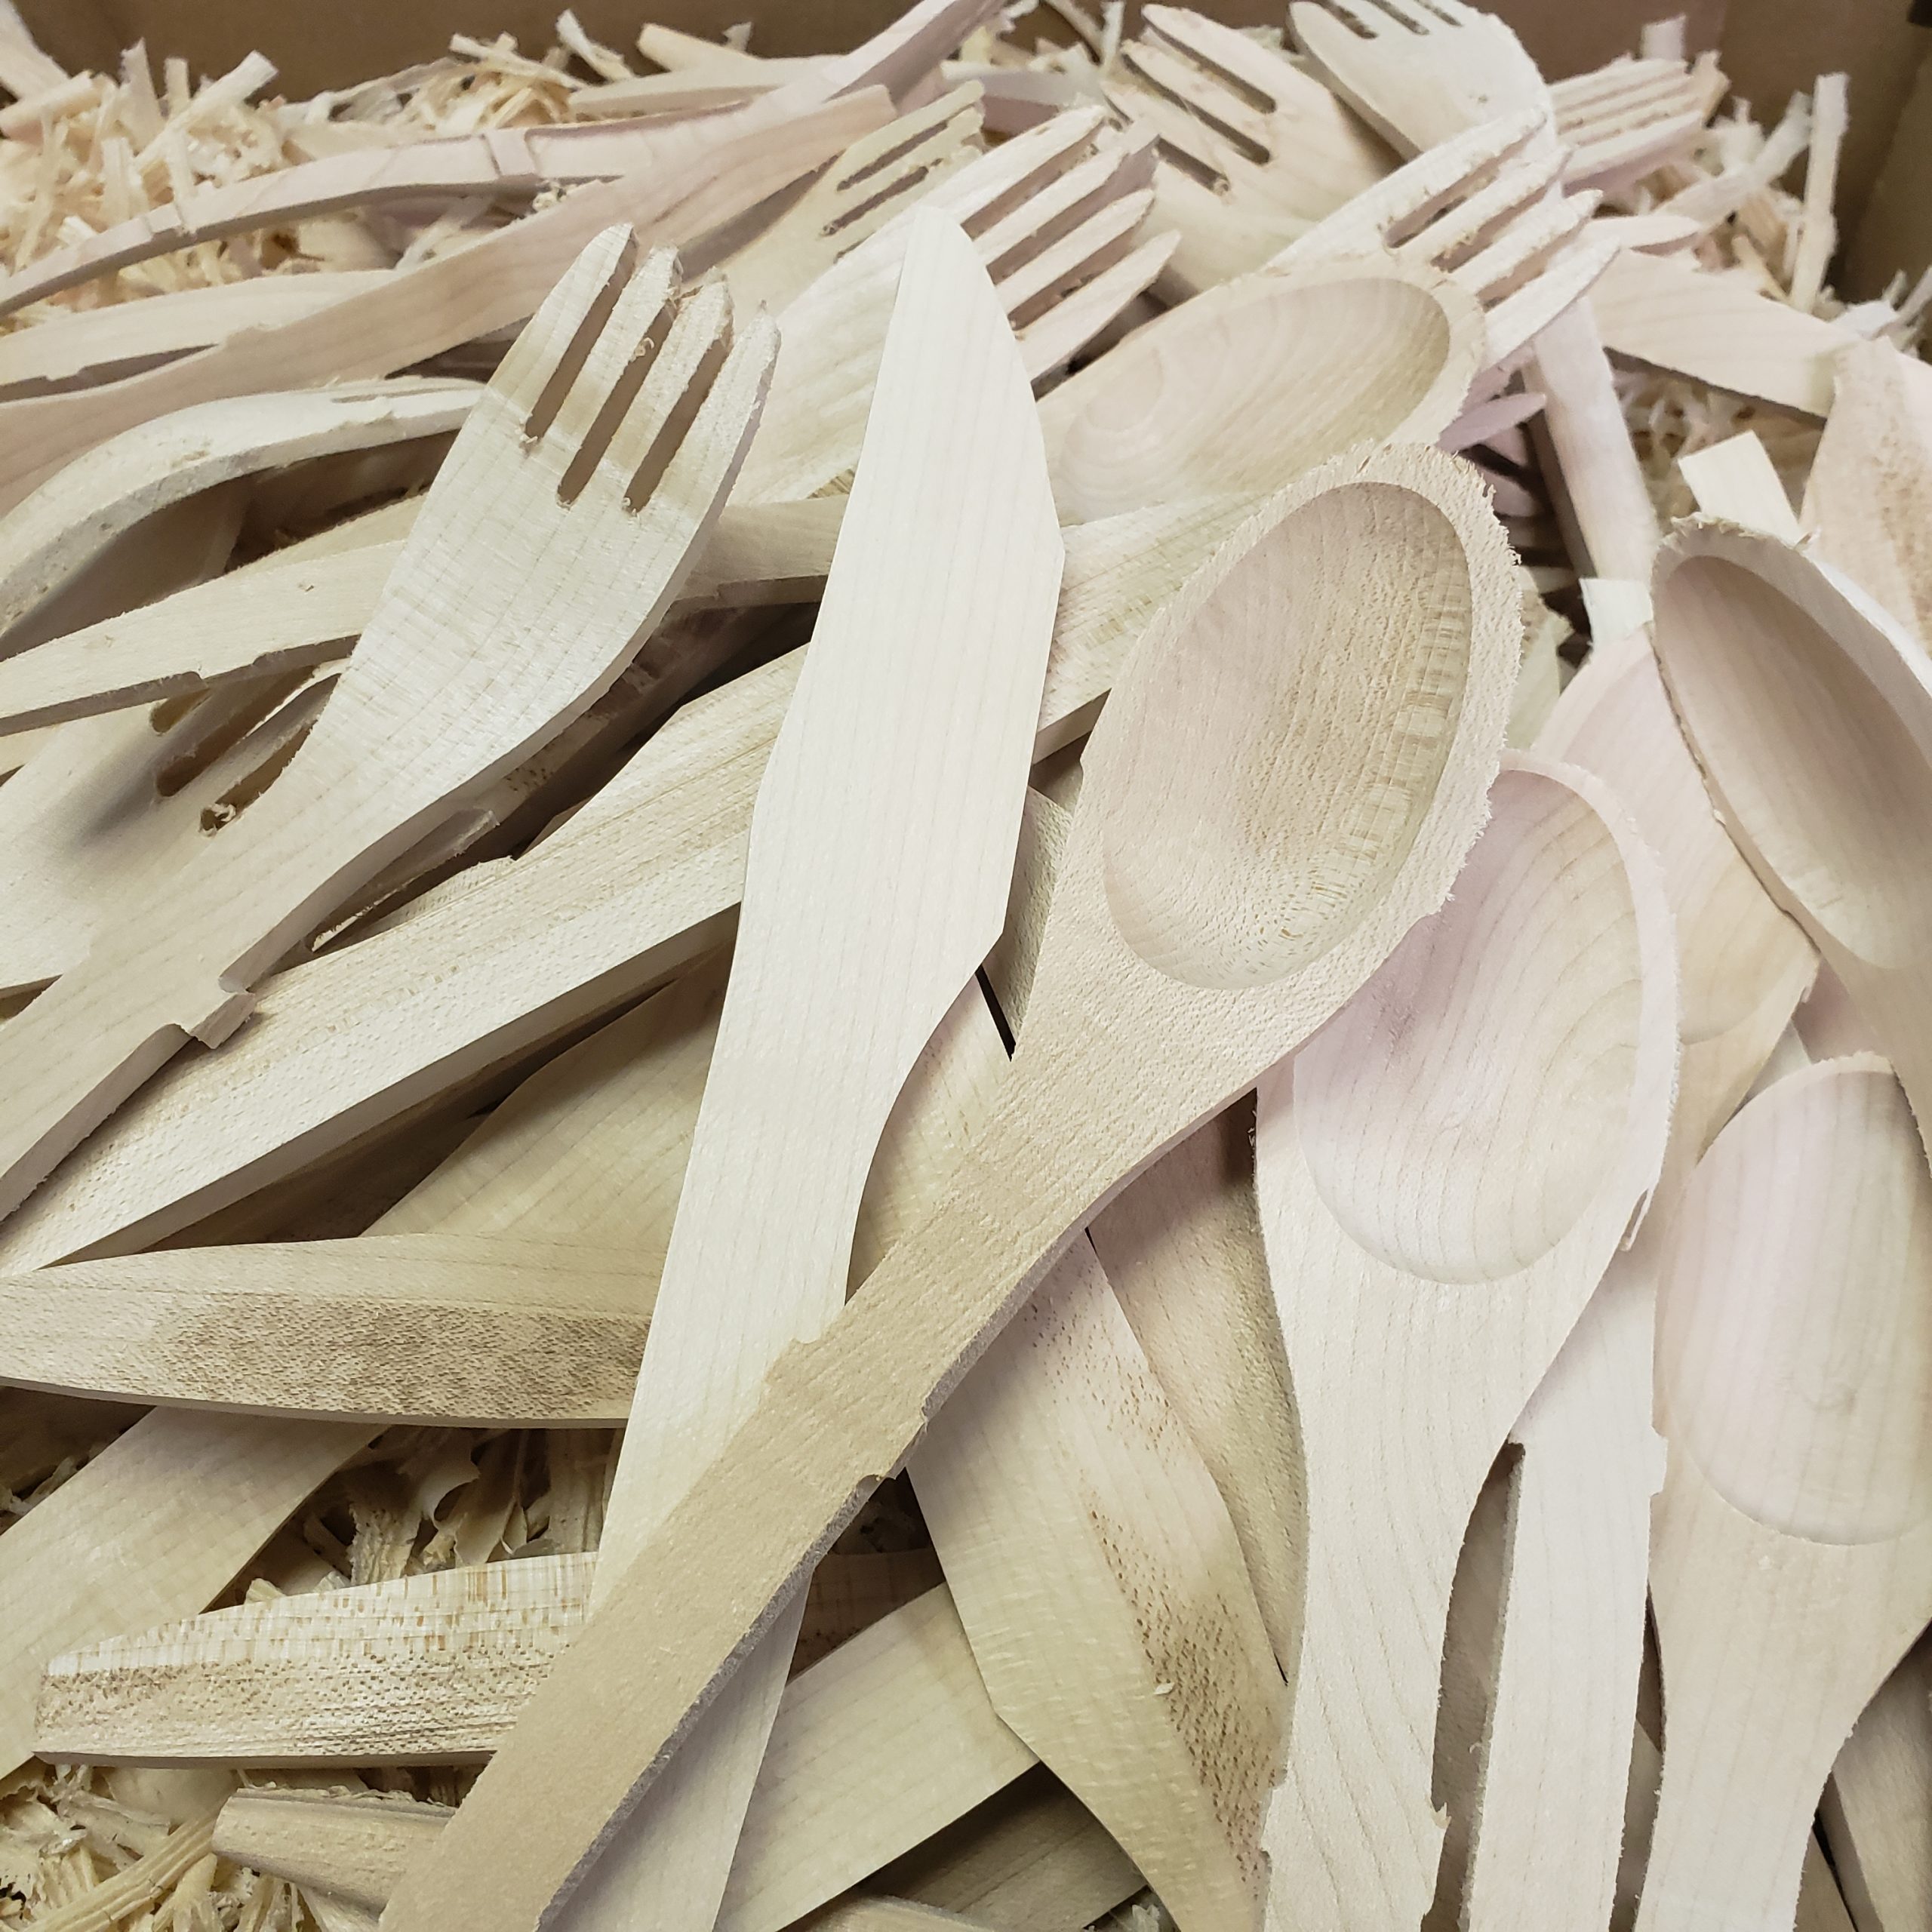 How are wooden utensils made